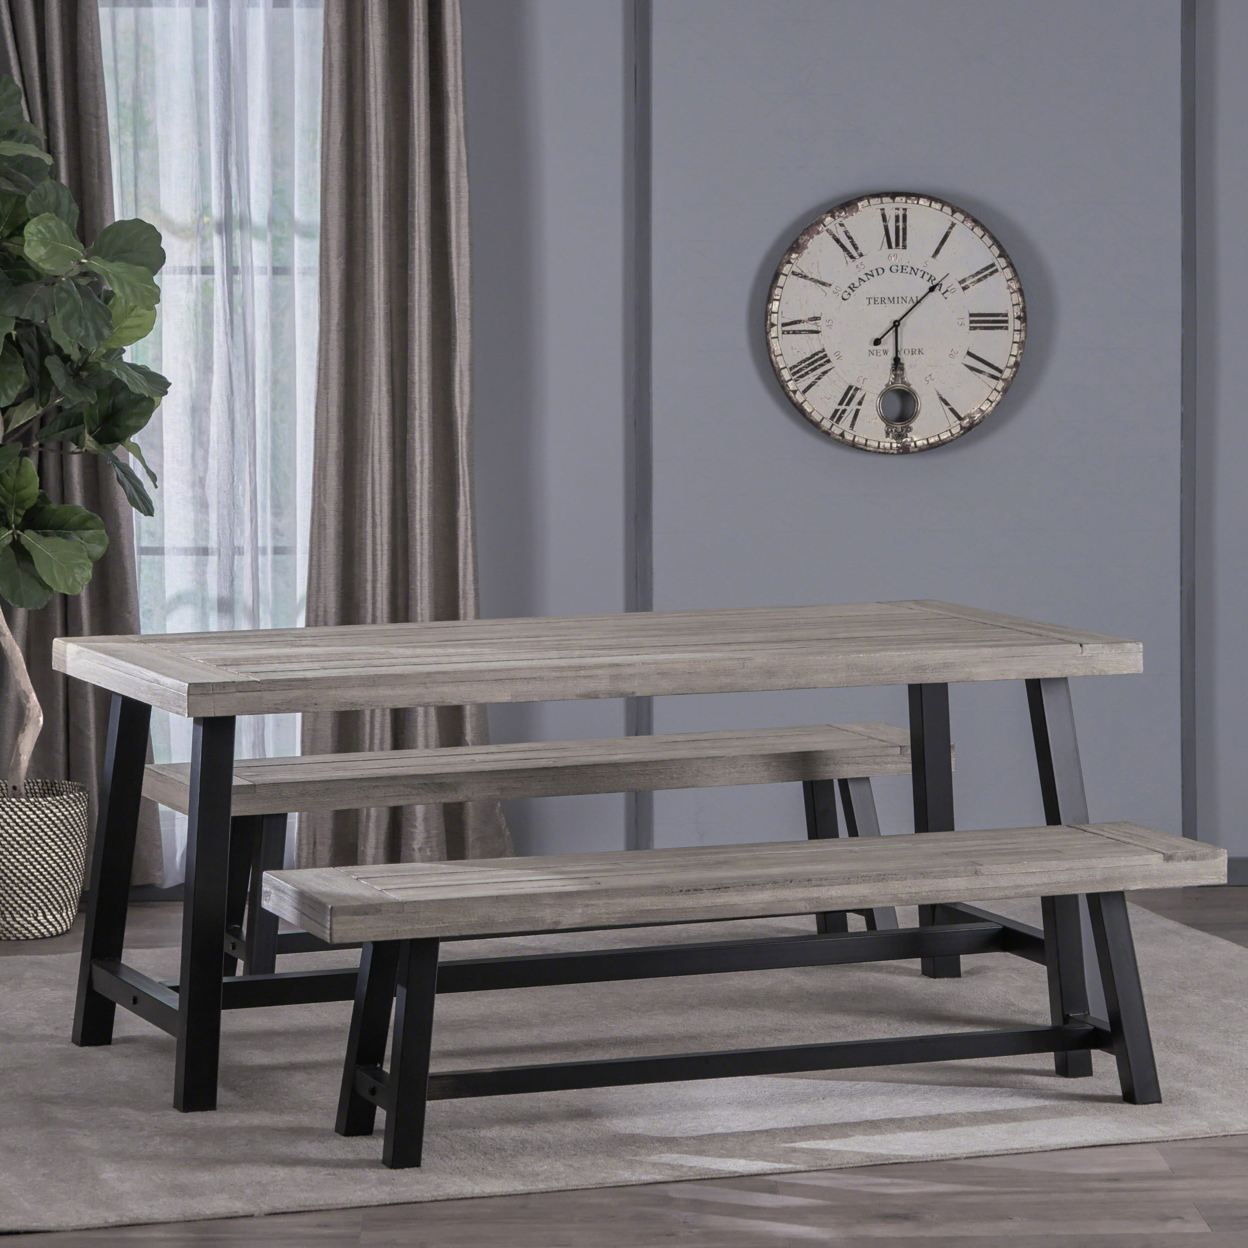 Angelina Indoor 3 Piece Finished Acacia Wood Picnic Set With Metal Finish Frame - Light Gray/Black